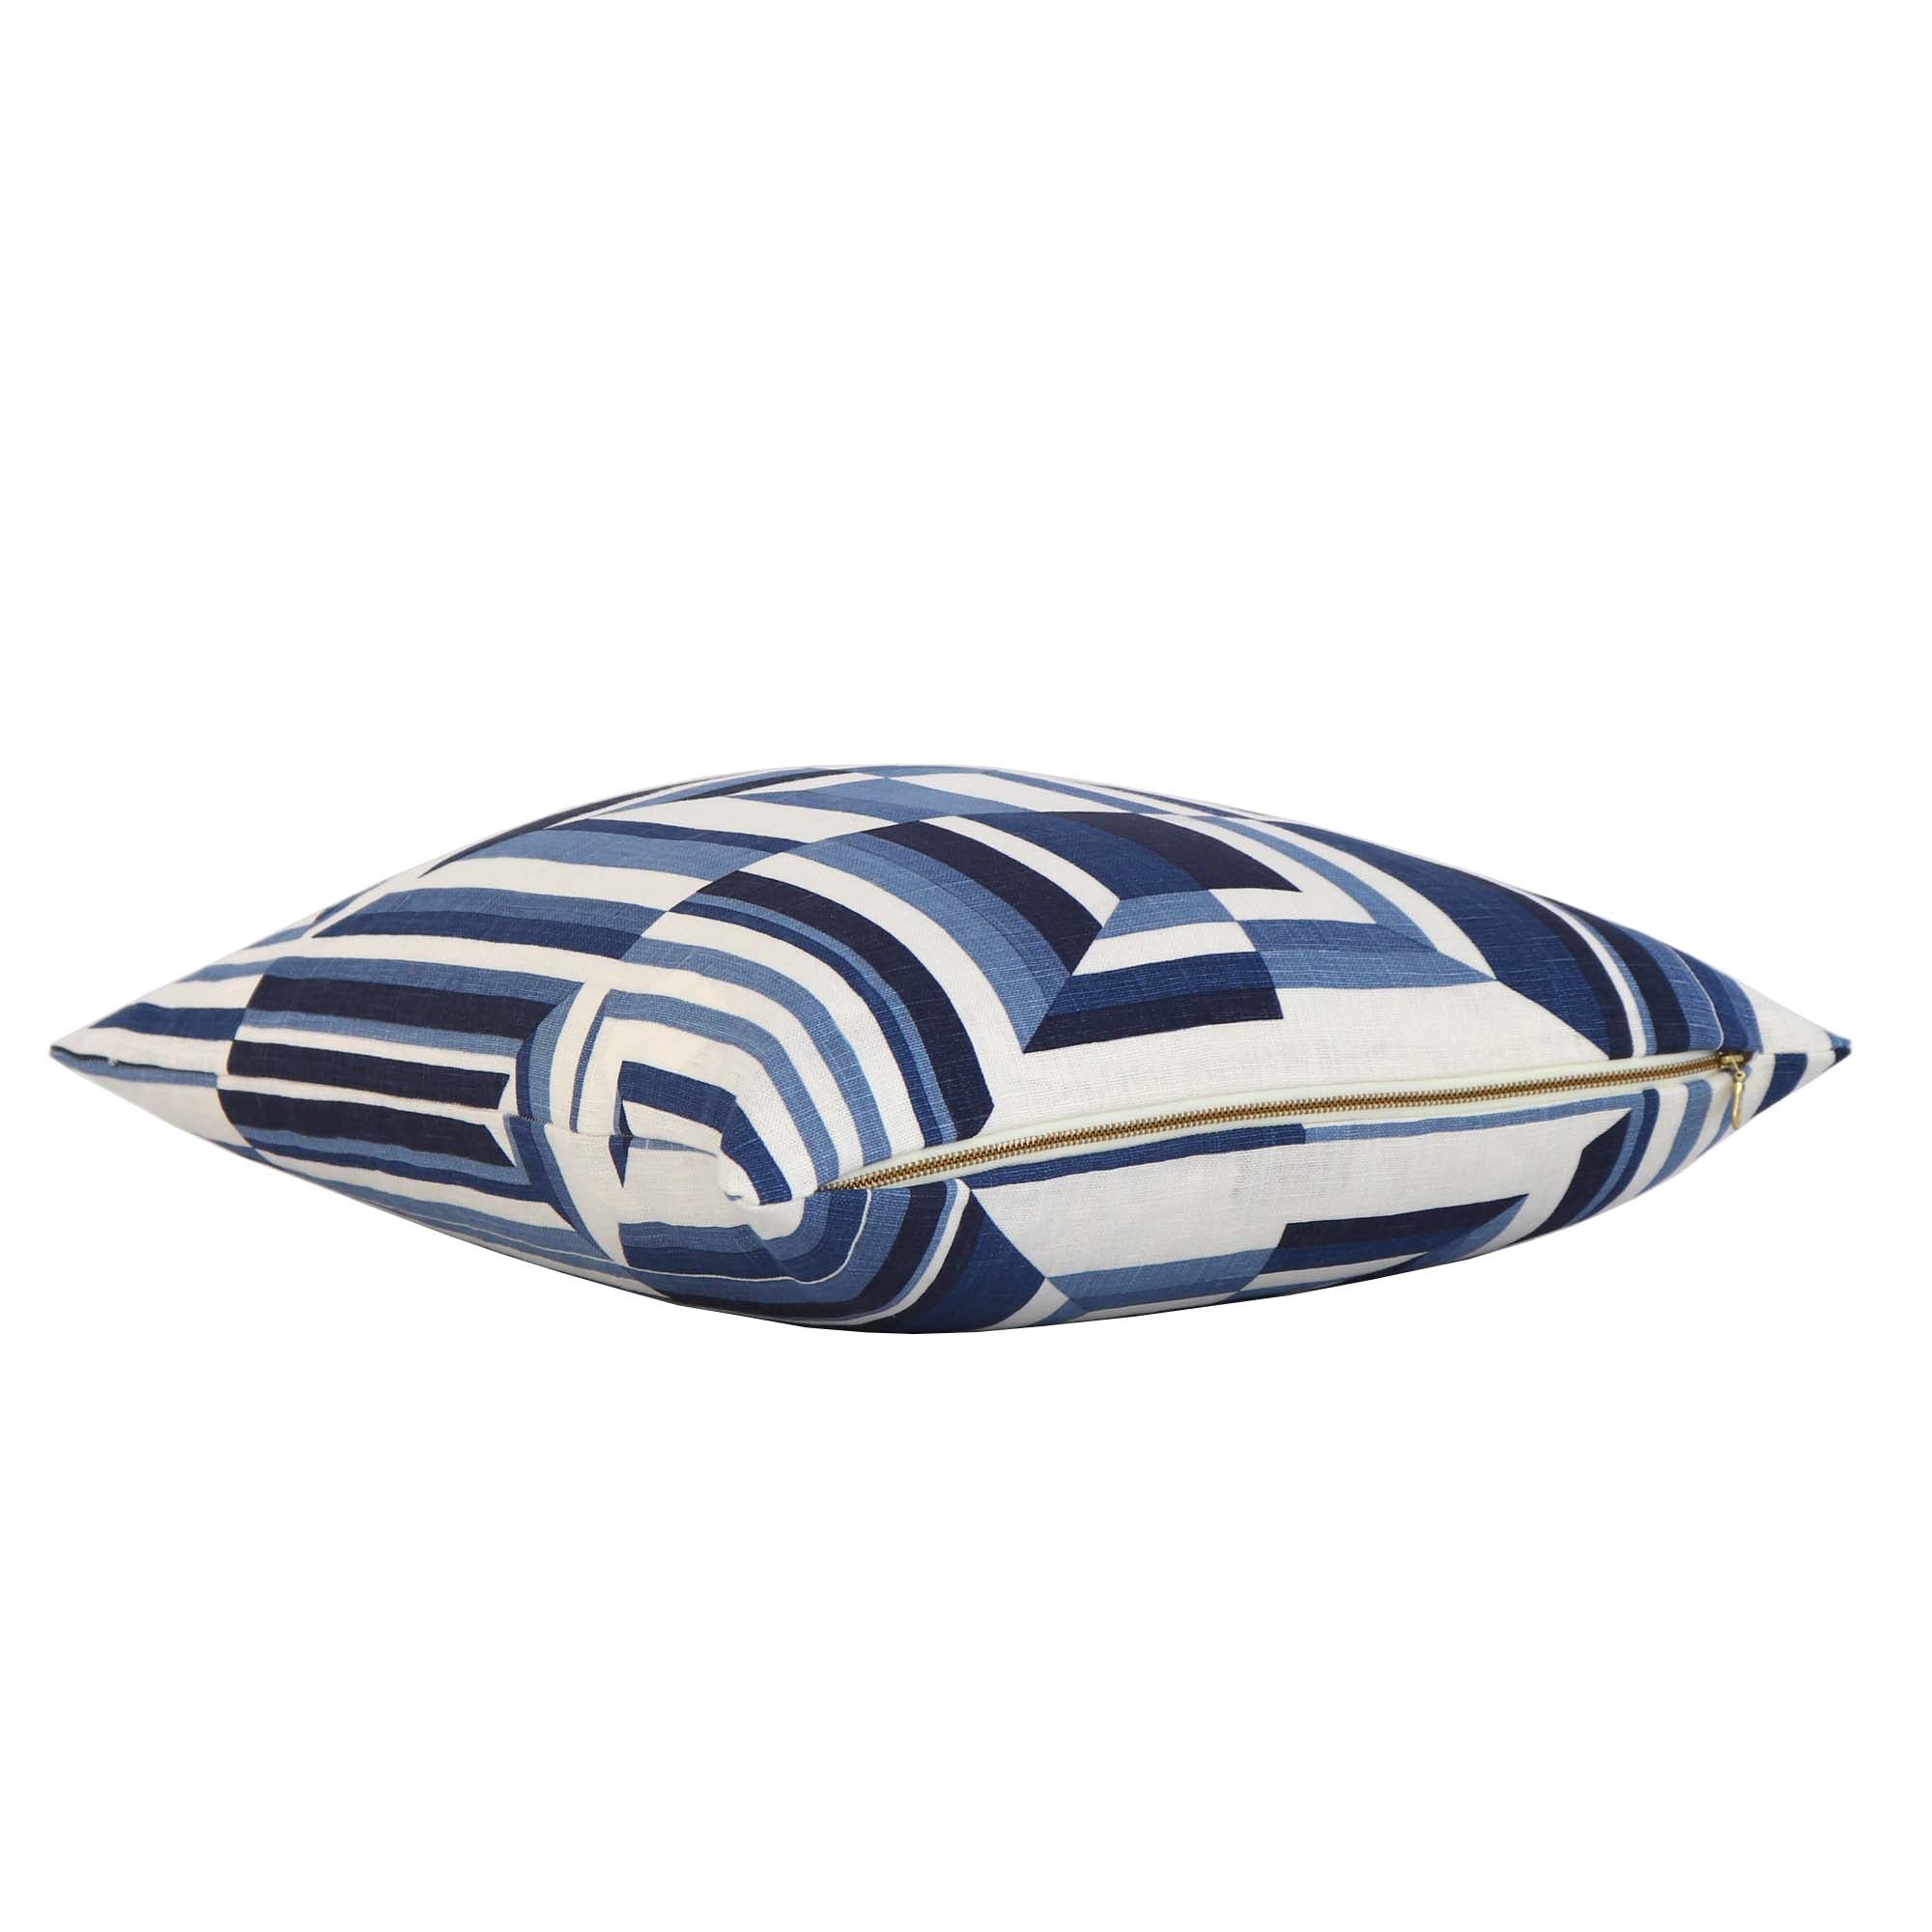 Thibaut Cubism Geometric Blue and White Stripes Linen Designer Luxury Decorative Throw Pillow Cover with Exposed Brass Gold Zipper